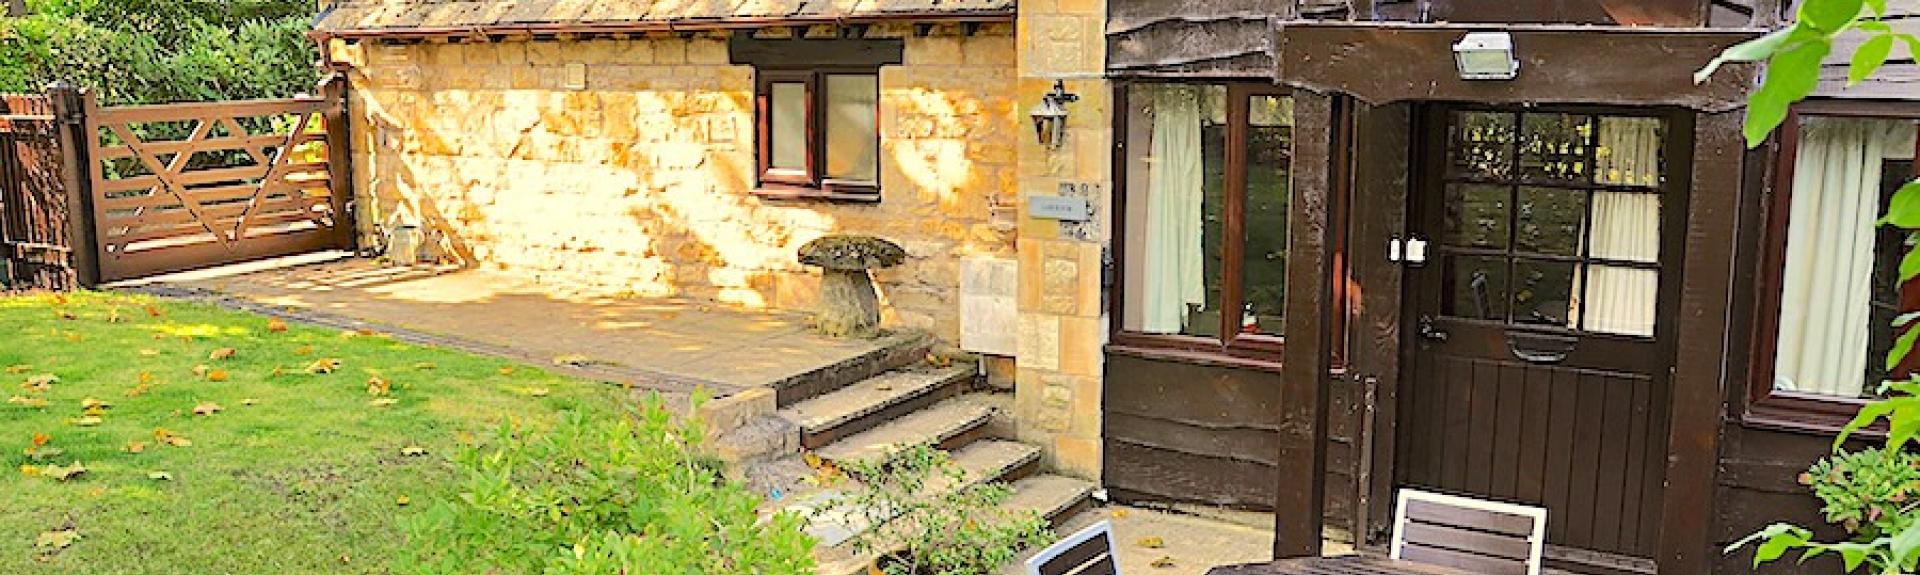 Exterior of a Cotswold honey-stone cottage overlooking a small lawn and patio with a dining table.